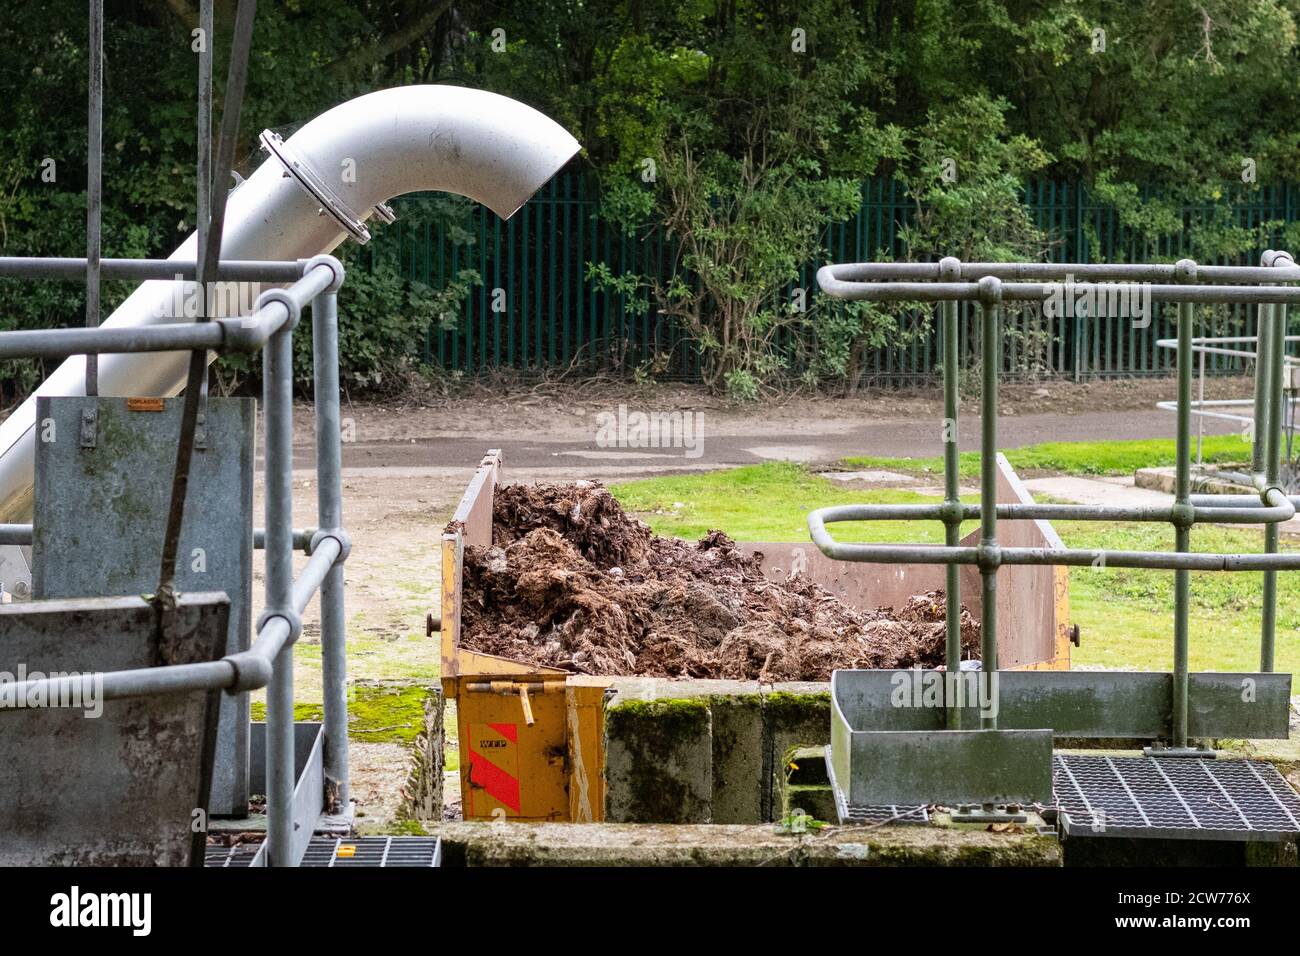 sewage works water treatment works - coarse material such as wet wipes removed during preliminary treatment - Richmond, Yorkshire, England, UK Stock Photo